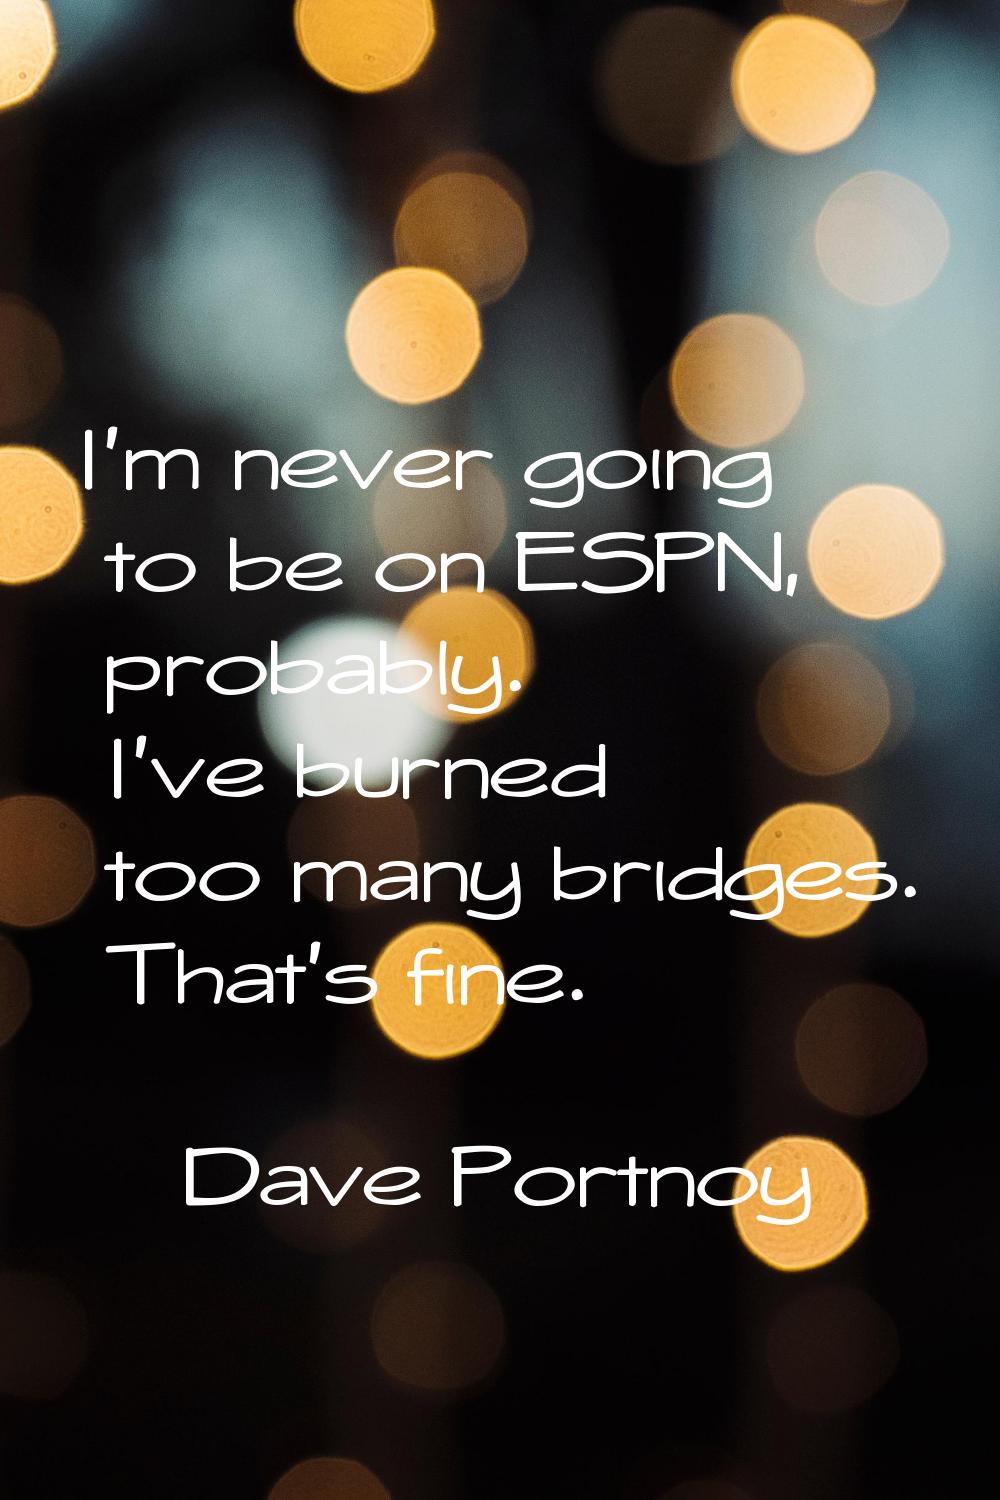 I'm never going to be on ESPN, probably. I've burned too many bridges. That's fine.